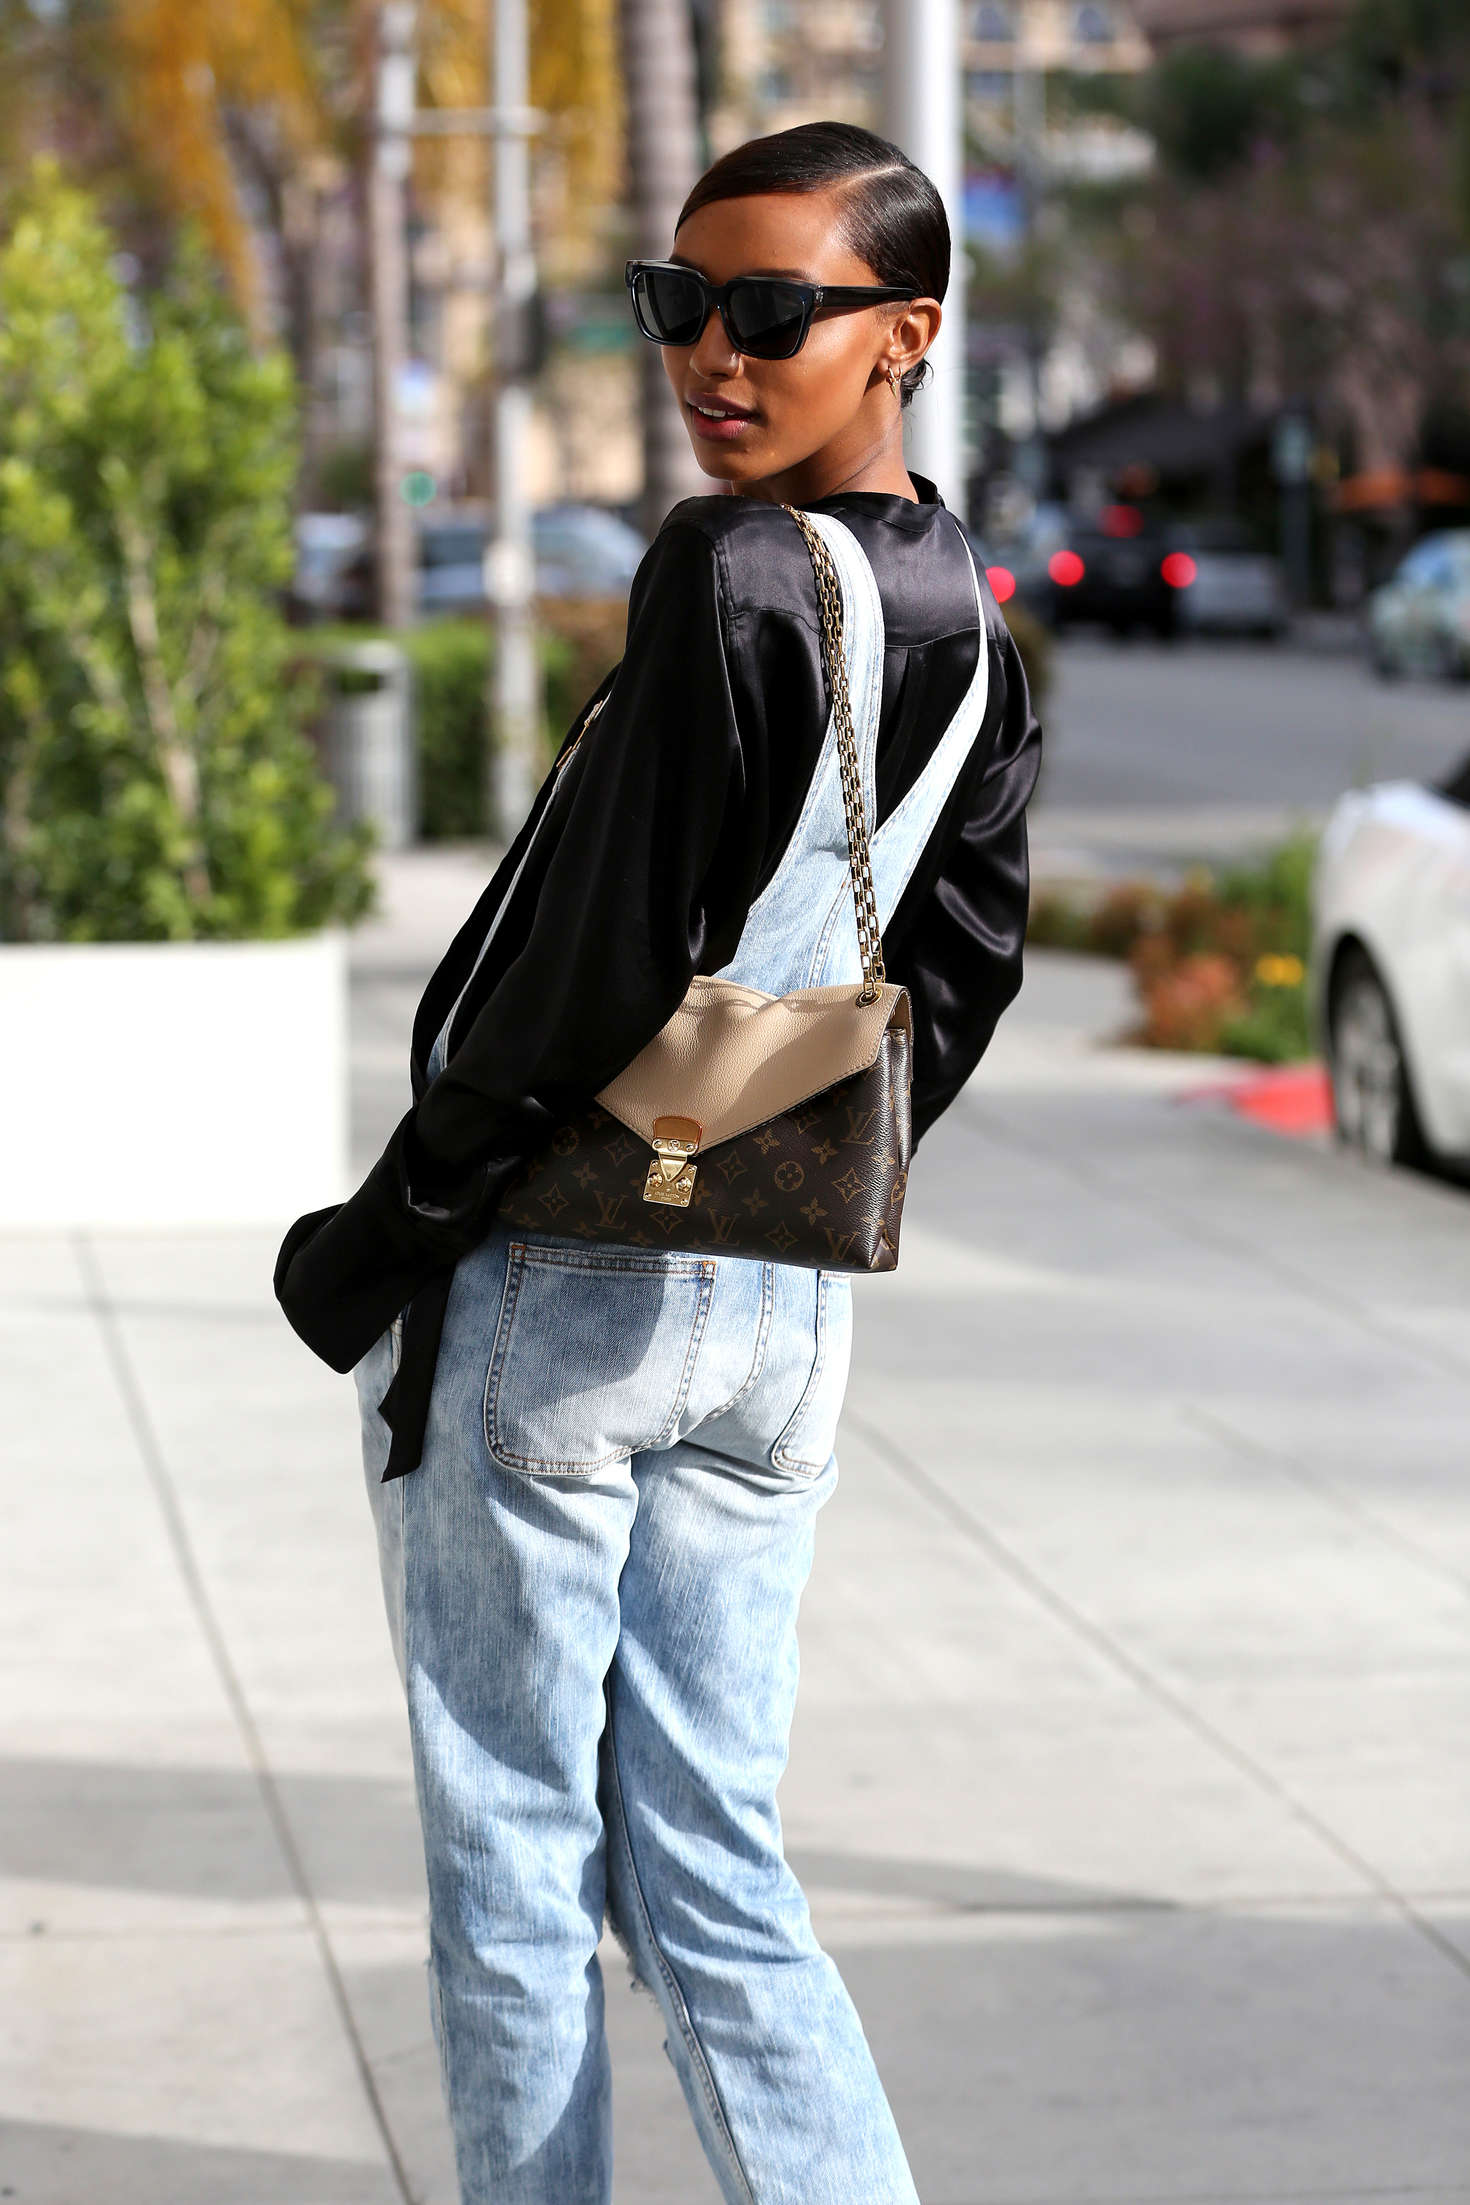 Jasmine Tookes in Jeans at Il Pastaio -01 | GotCeleb